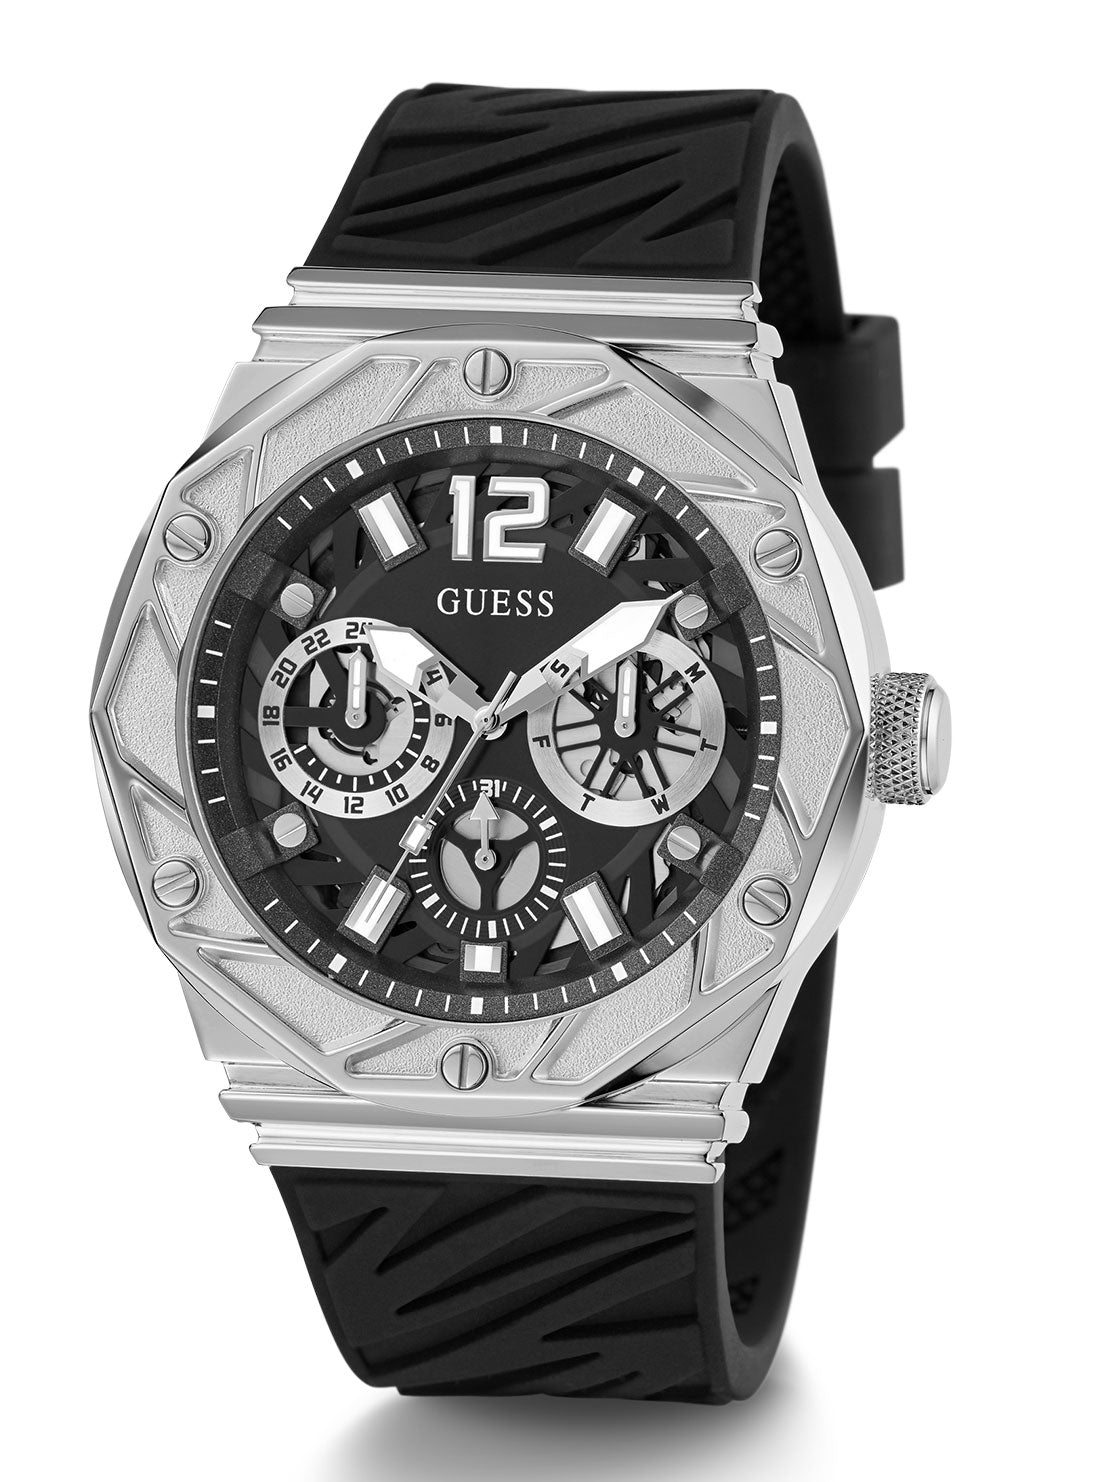 GUESS Men's Black Silver Rival Silicone Watch GW0634G1 Full View